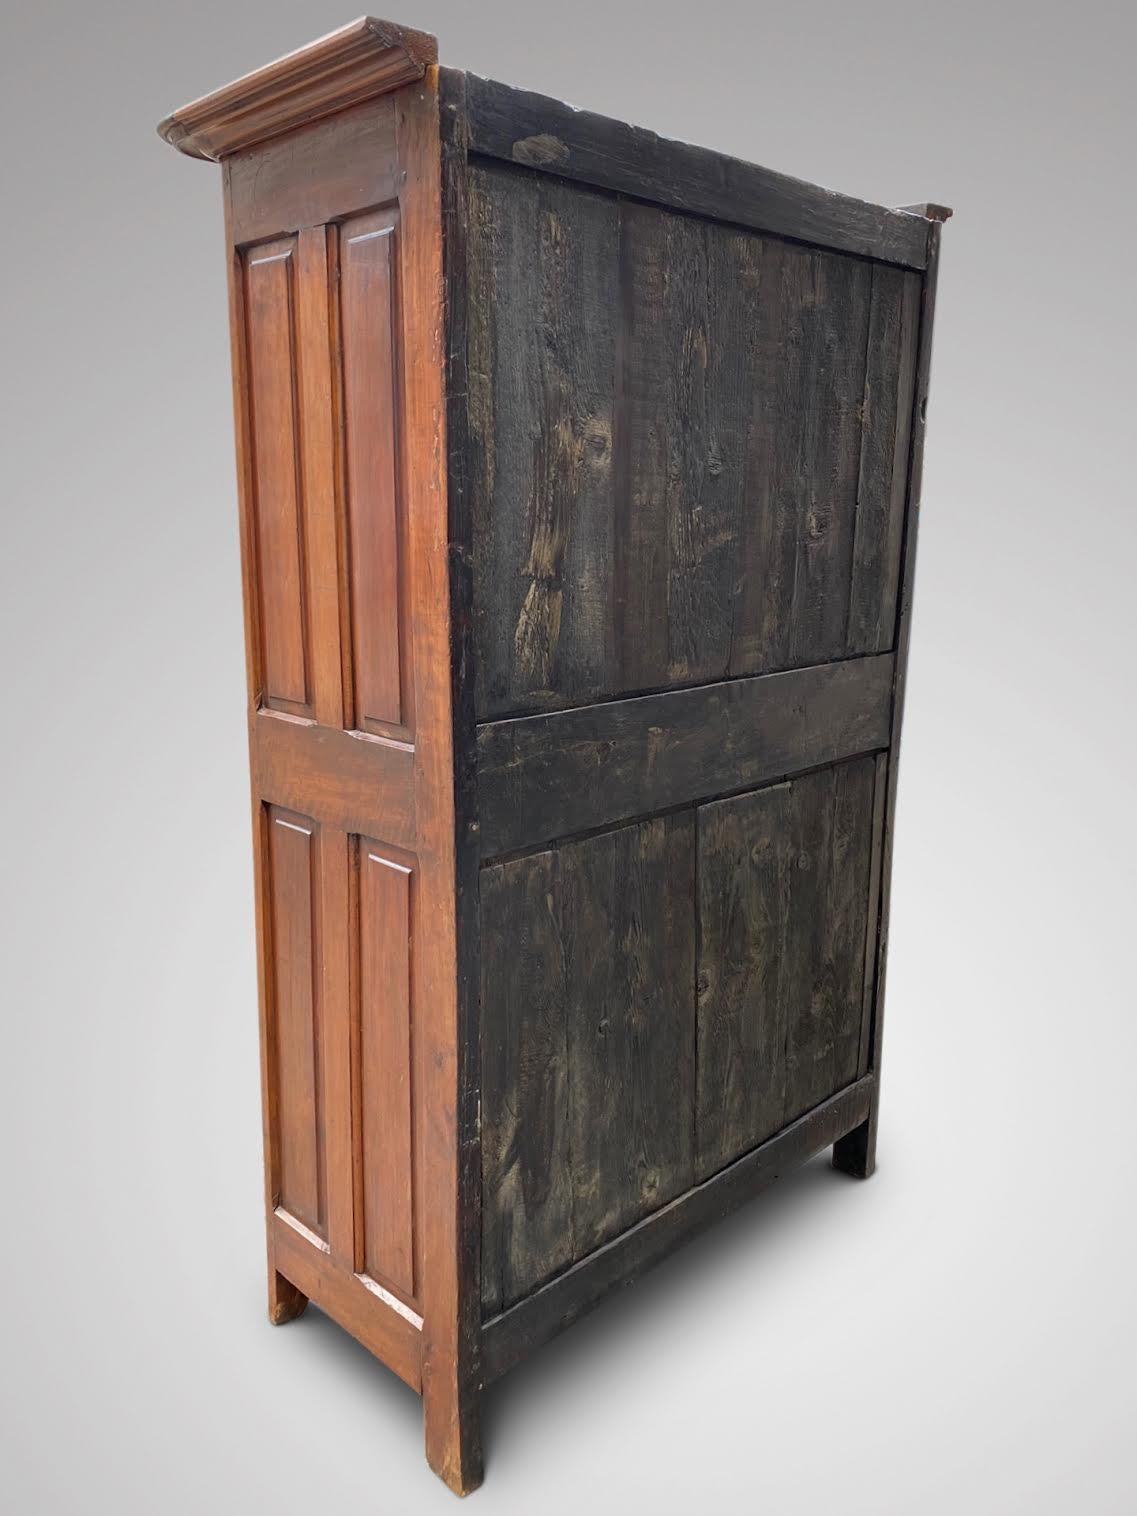 Stunning French Mangeadou or Pantry in Walnut from the Provence In Good Condition In Petworth,West Sussex, GB